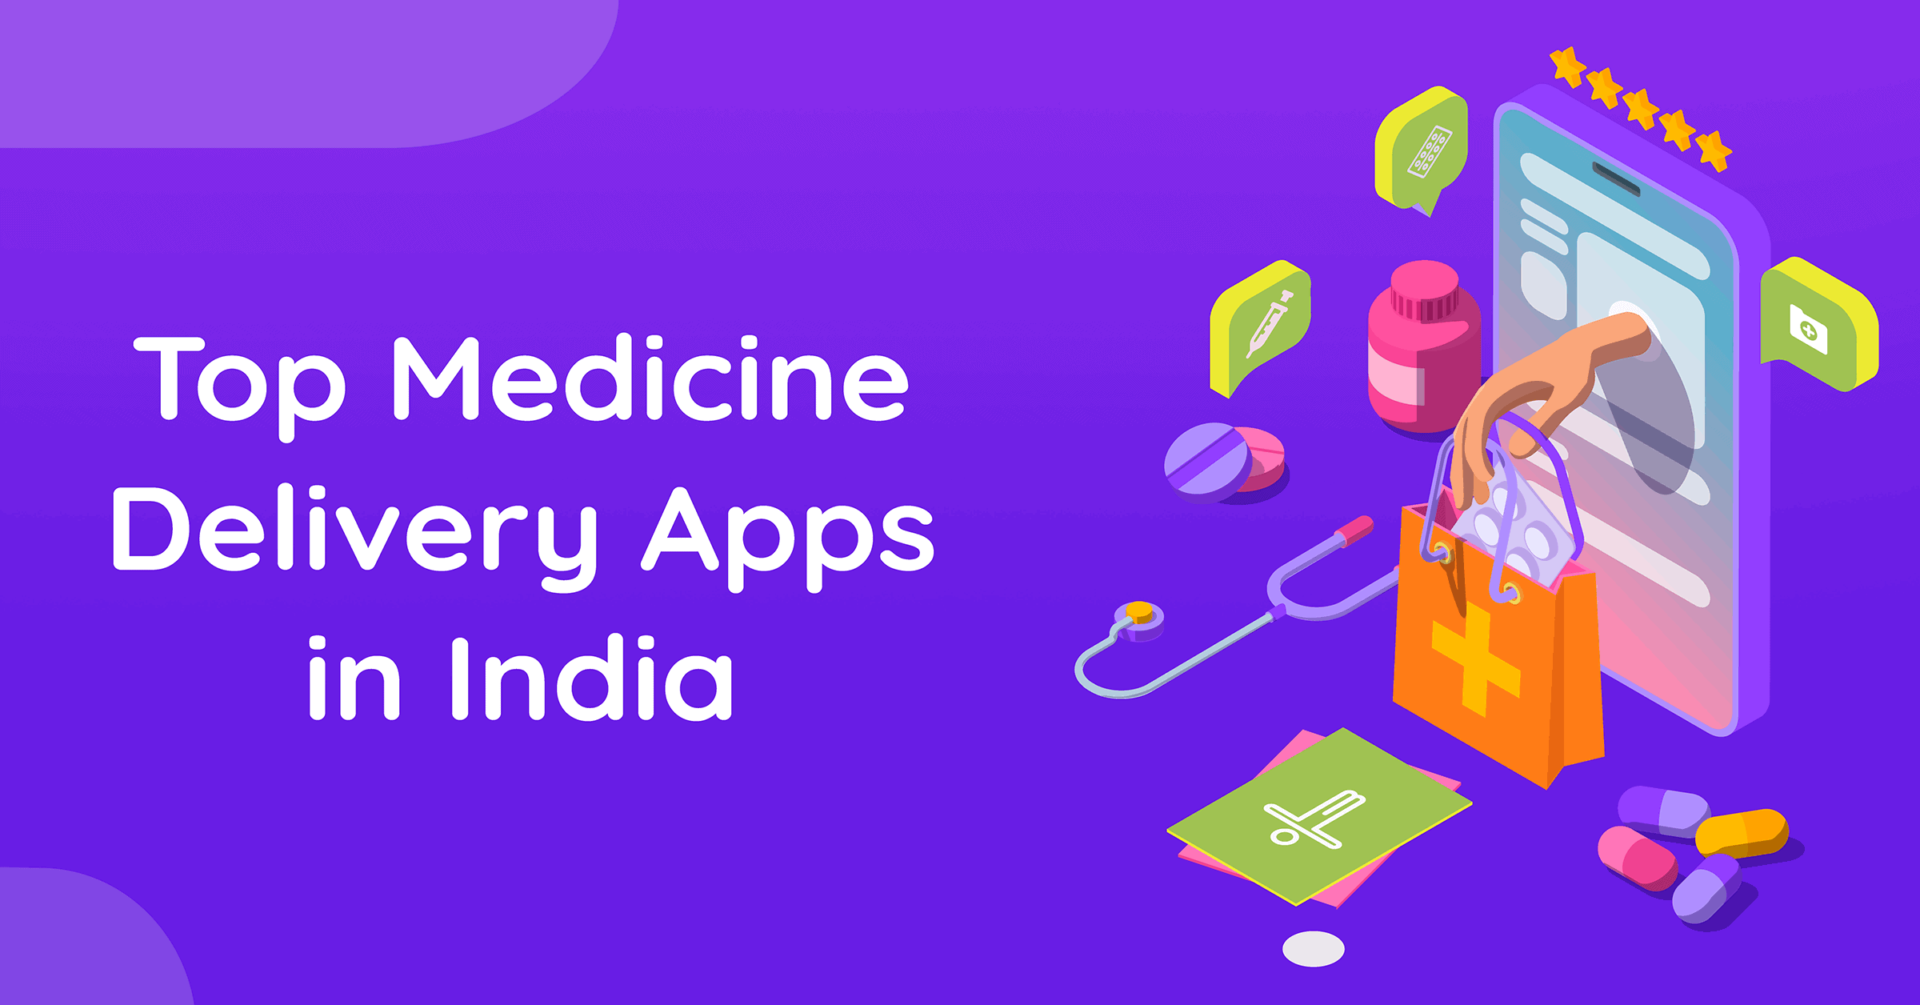 This is the featured image of the post which lists down the top medicine delivery apps in India